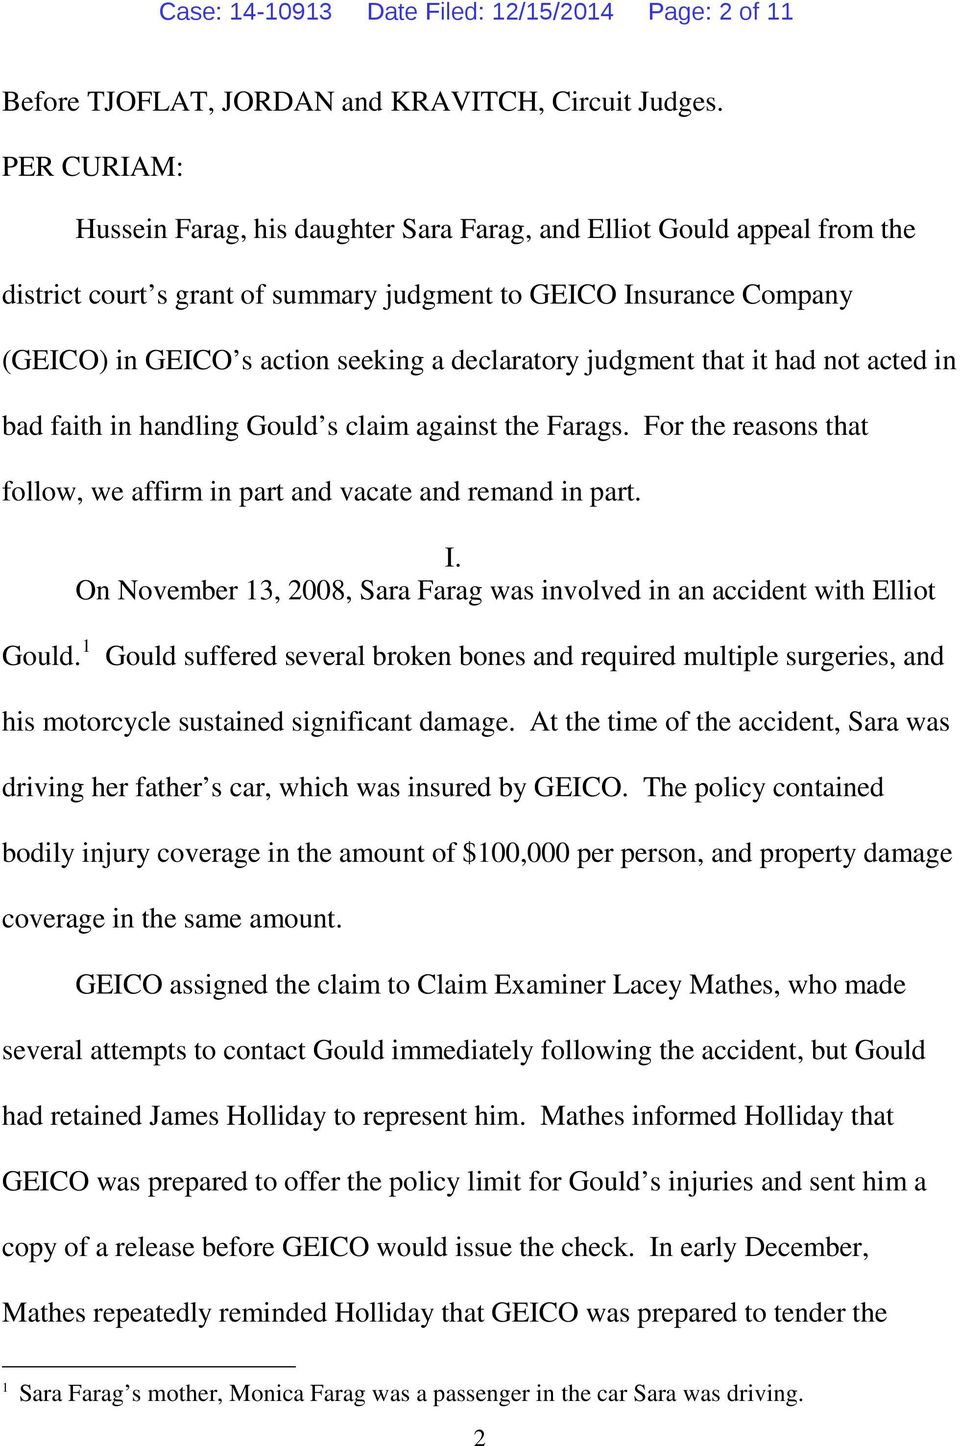 declaratory judgment that it had not acted in bad faith in handling Gould s claim against the Farags. For the reasons that follow, we affirm in part and vacate and remand in part. I.